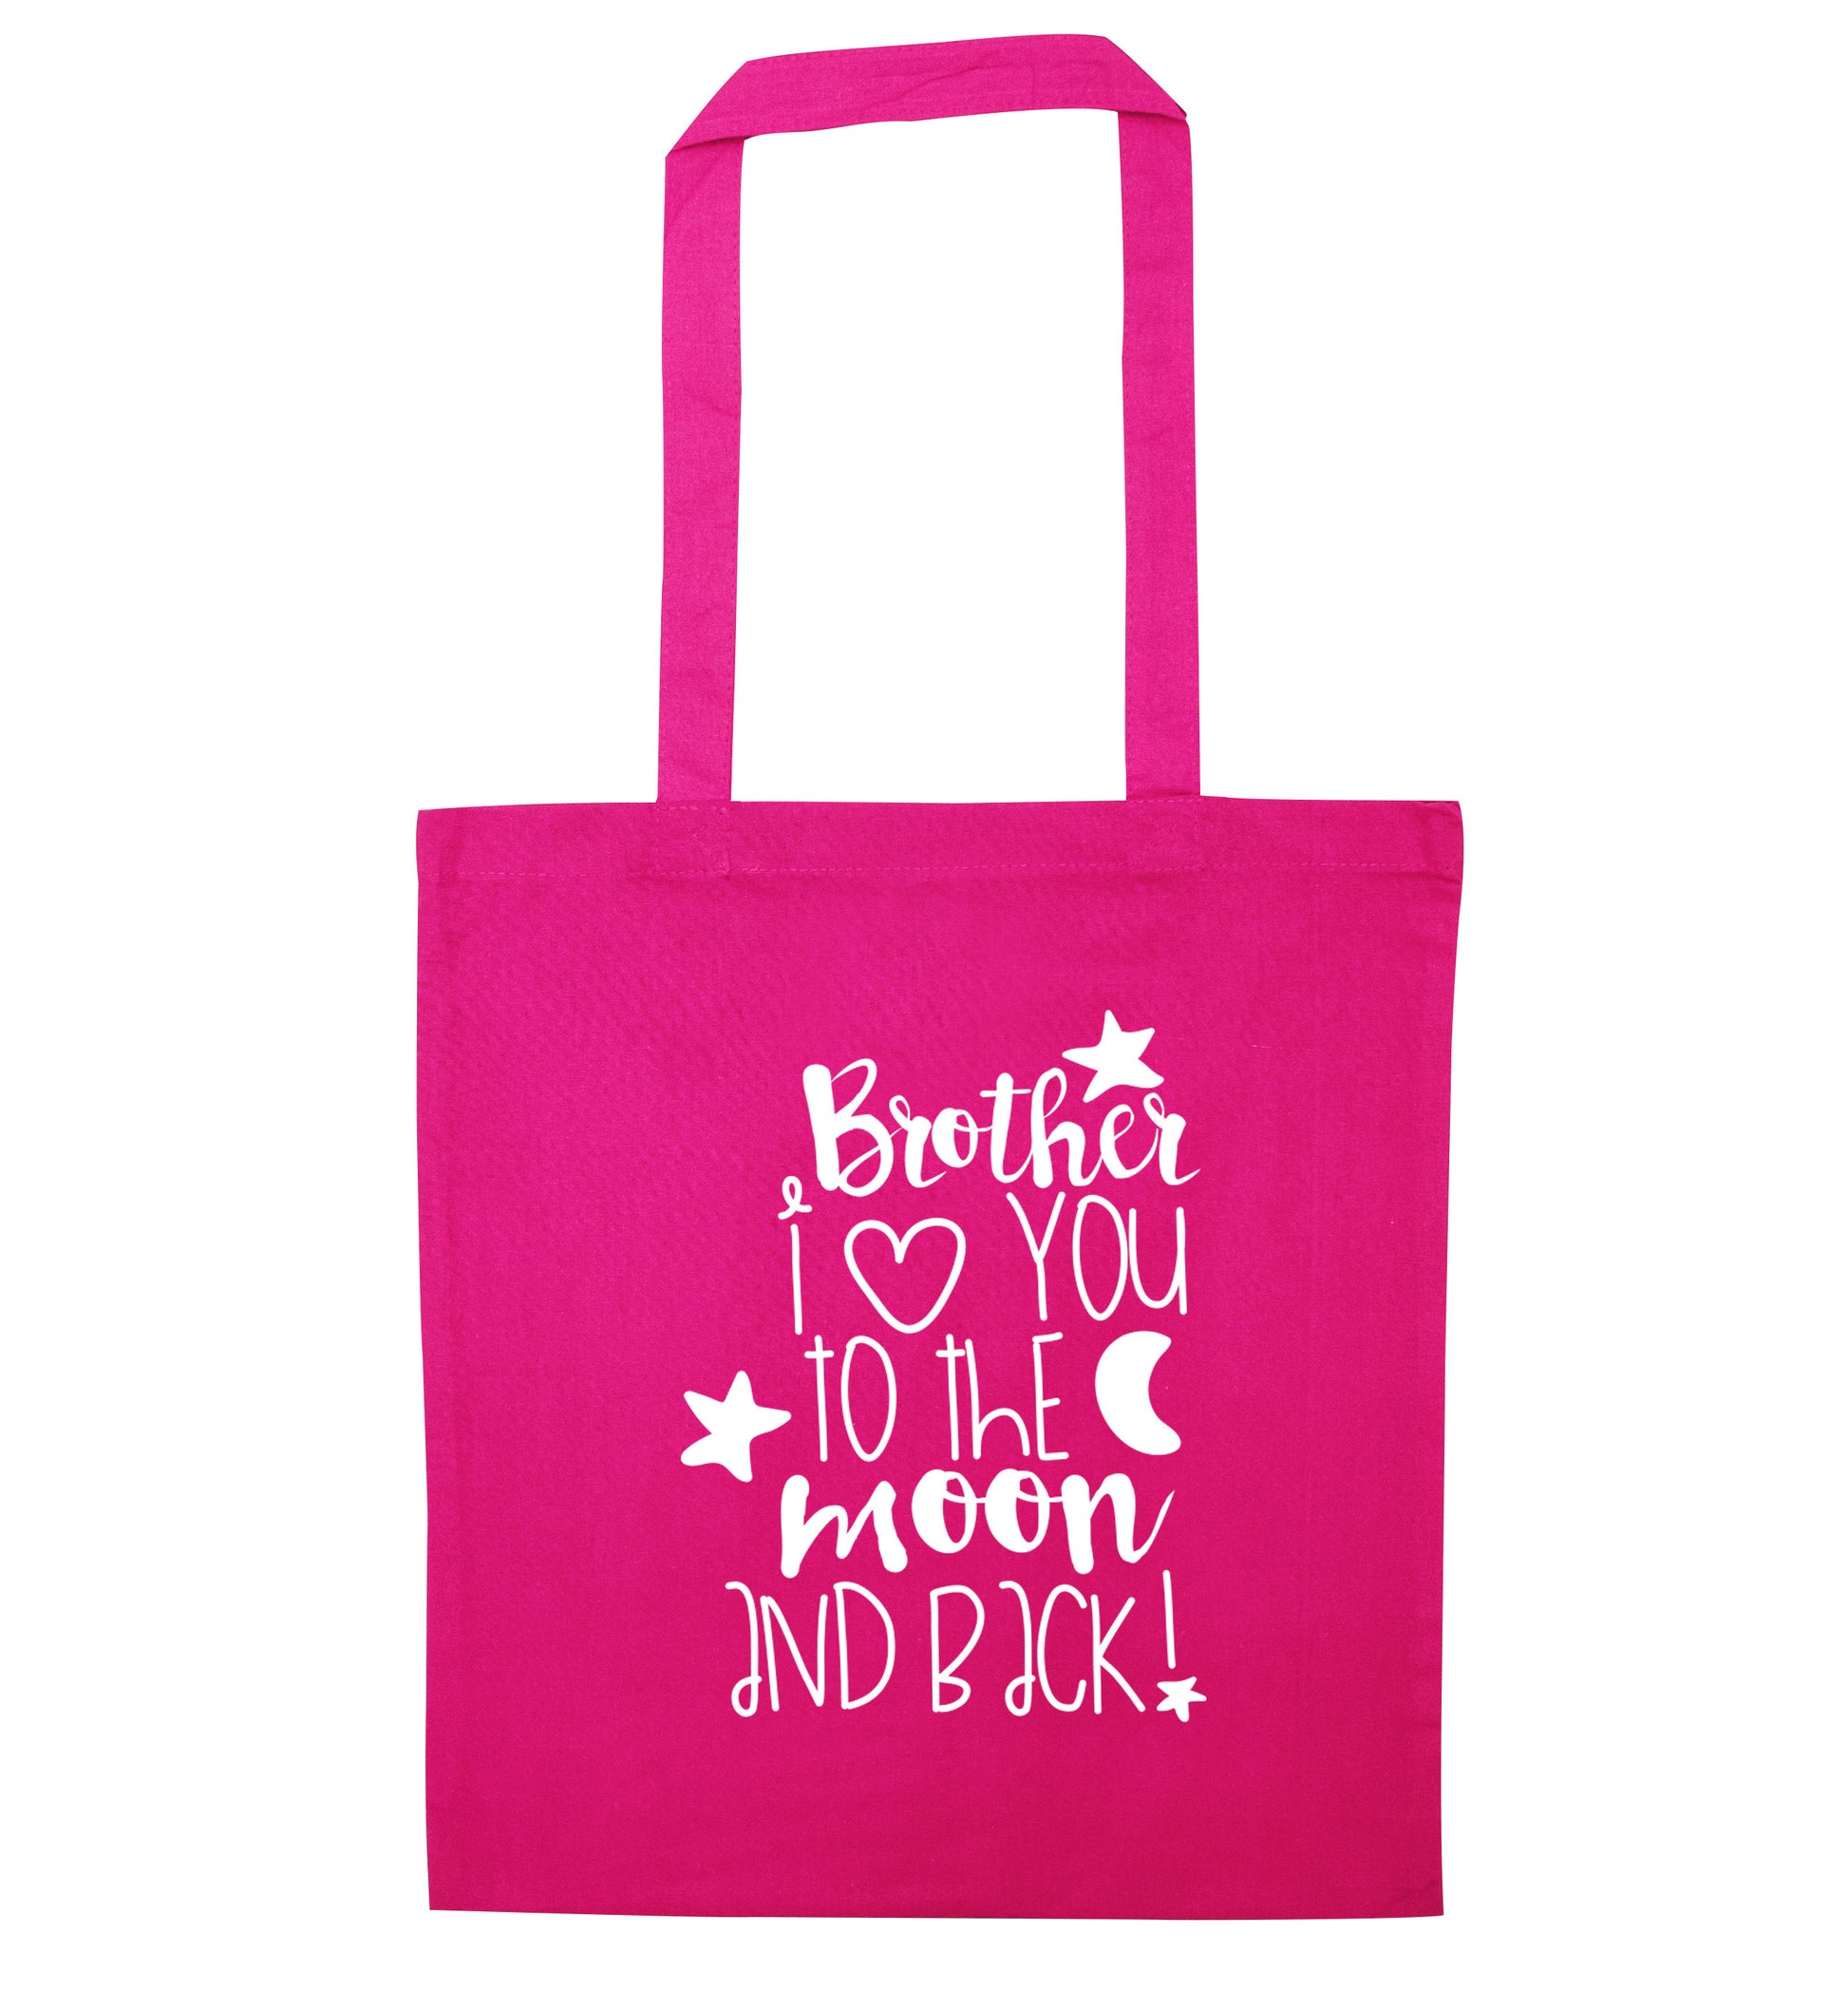 Brother I love you to the moon and back pink tote bag